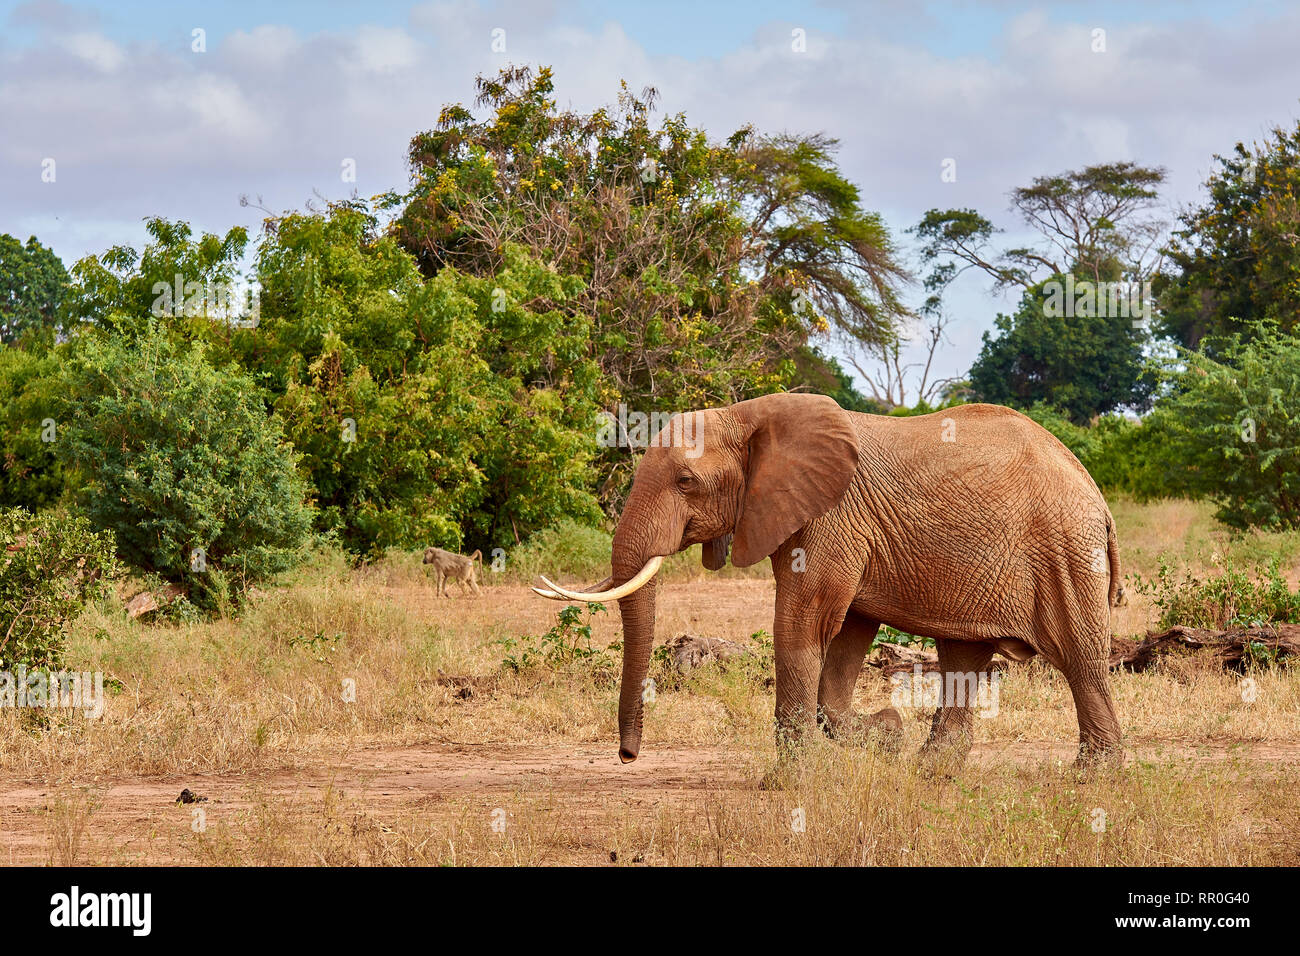 View of the African elephant savanna goes on safari in Kenya, with blurred trees and monkeys in the background Stock Photo